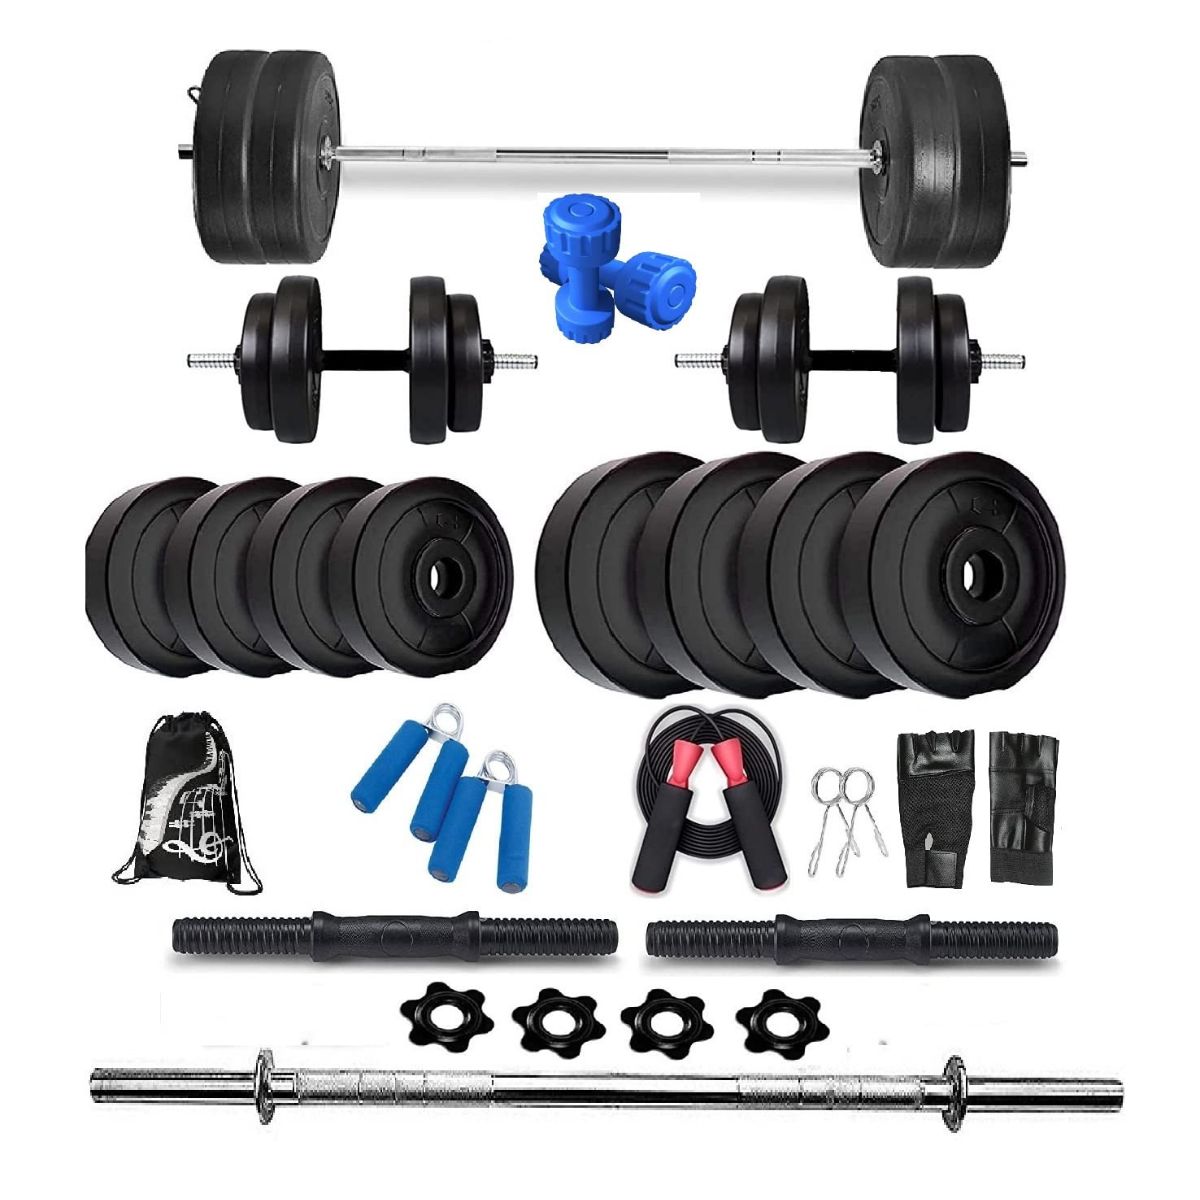 https://www.sportswing.in/wp-content/uploads/2021/07/Bodyfit-Home-Gym-Combo-Home-Gym-Set-Gym-Equipment-with-Accessories-20kg.jpg